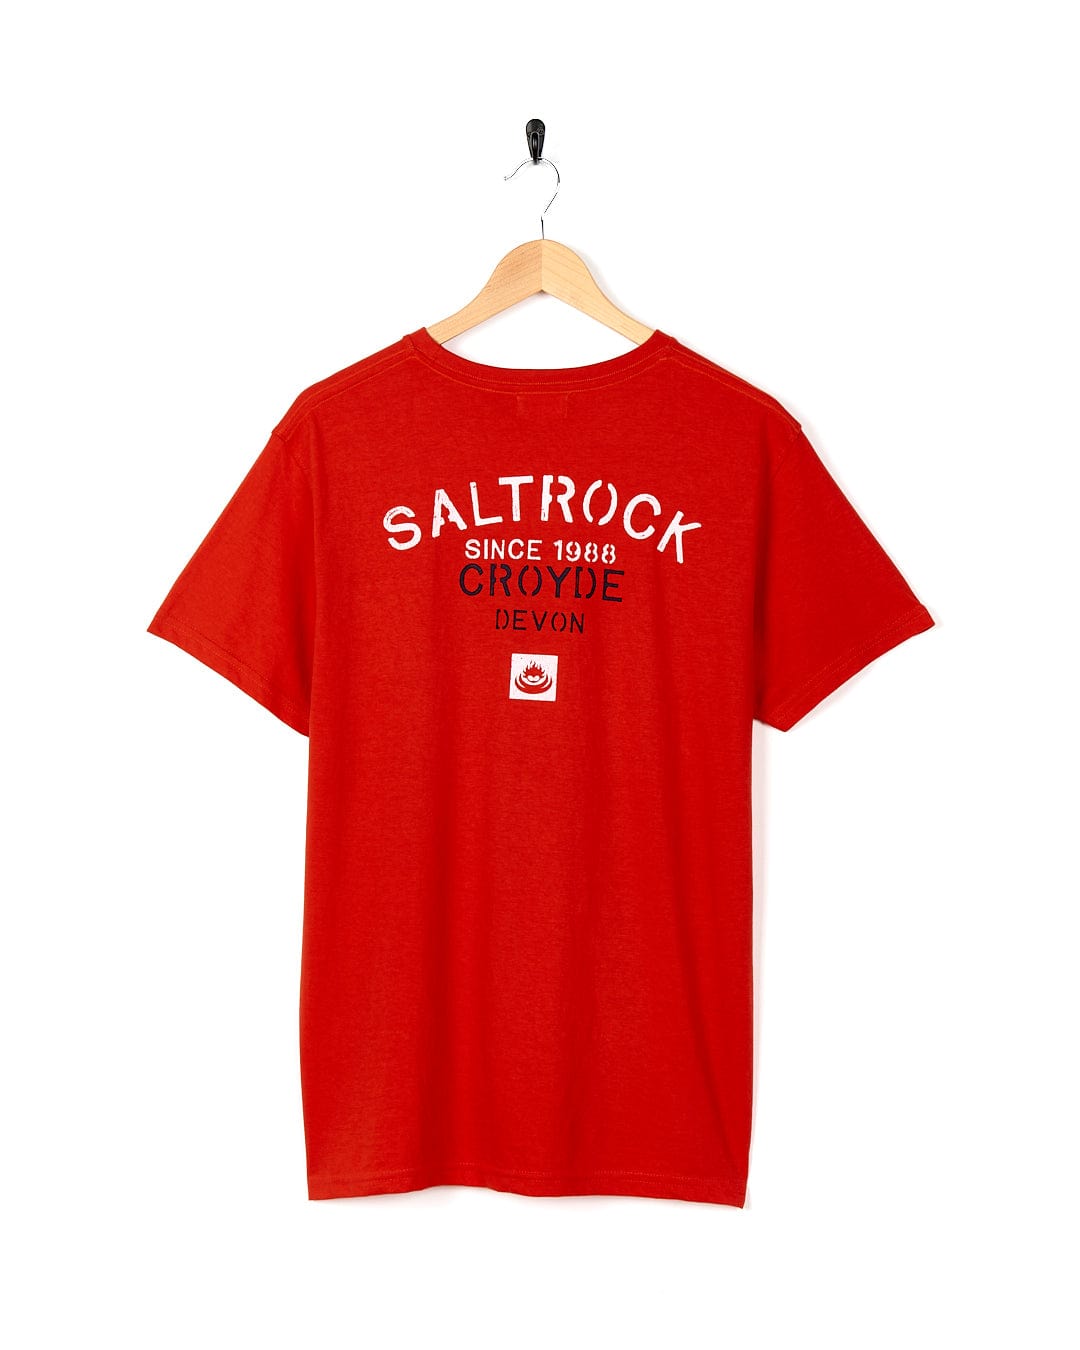 A Stencil - Mens Location T-Shirt - Croyde - Red with the brand Saltrock on it.